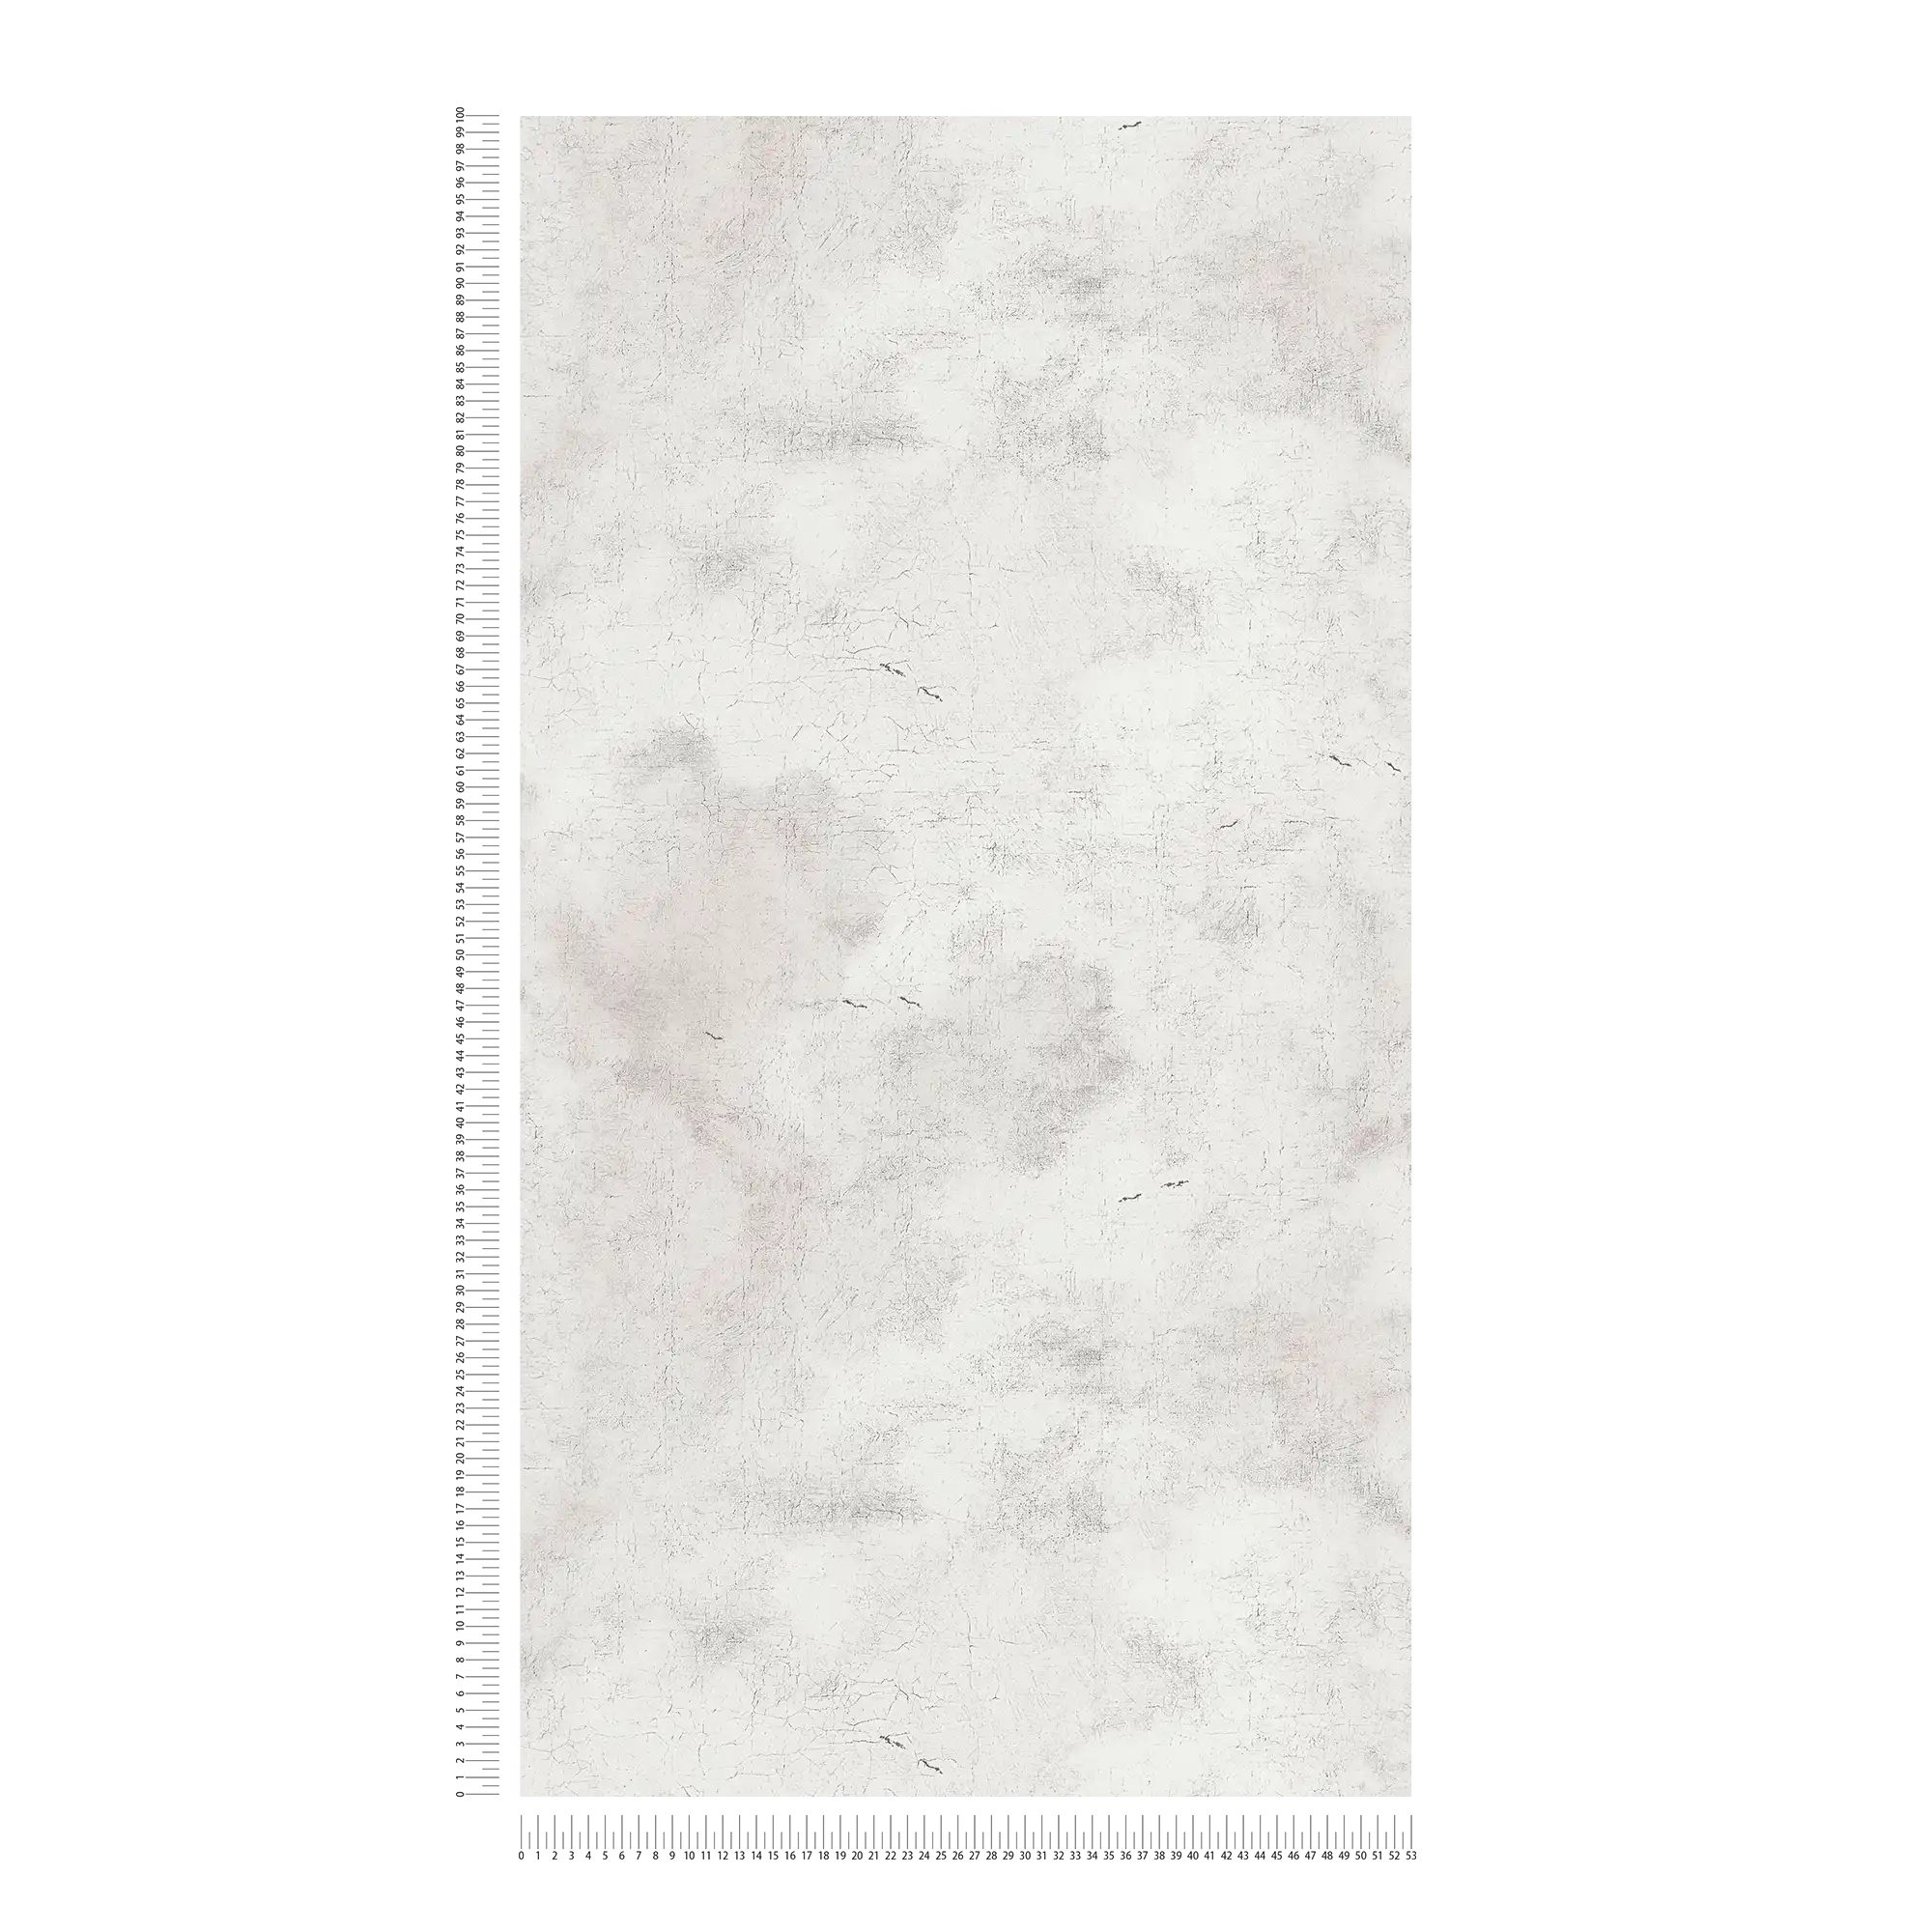             Non-woven wallpaper sky & clouds, painting style - white, grey
        